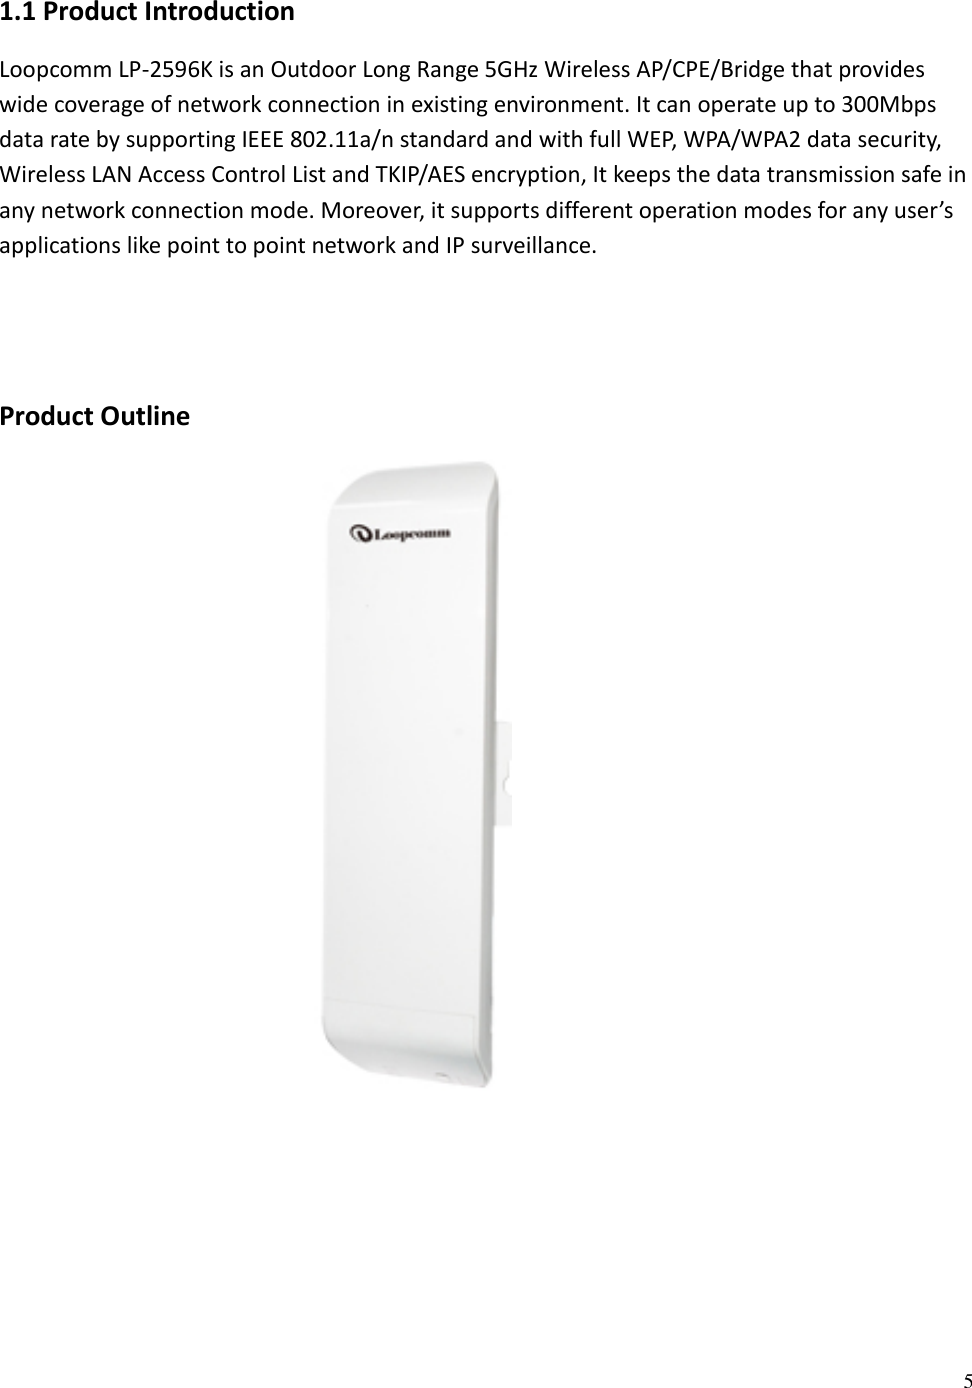 5  1.1 Product Introduction Loopcomm LP-2596K is an Outdoor Long Range 5GHz Wireless AP/CPE/Bridge that provides wide coverage of network connection in existing environment. It can operate up to 300Mbps data rate by supporting IEEE 802.11a/n standard and with full WEP, WPA/WPA2 data security, Wireless LAN Access Control List and TKIP/AES encryption, It keeps the data transmission safe in any network connection mode. Moreover, it supports different operation modes for any user’s applications like point to point network and IP surveillance.   Product Outline      